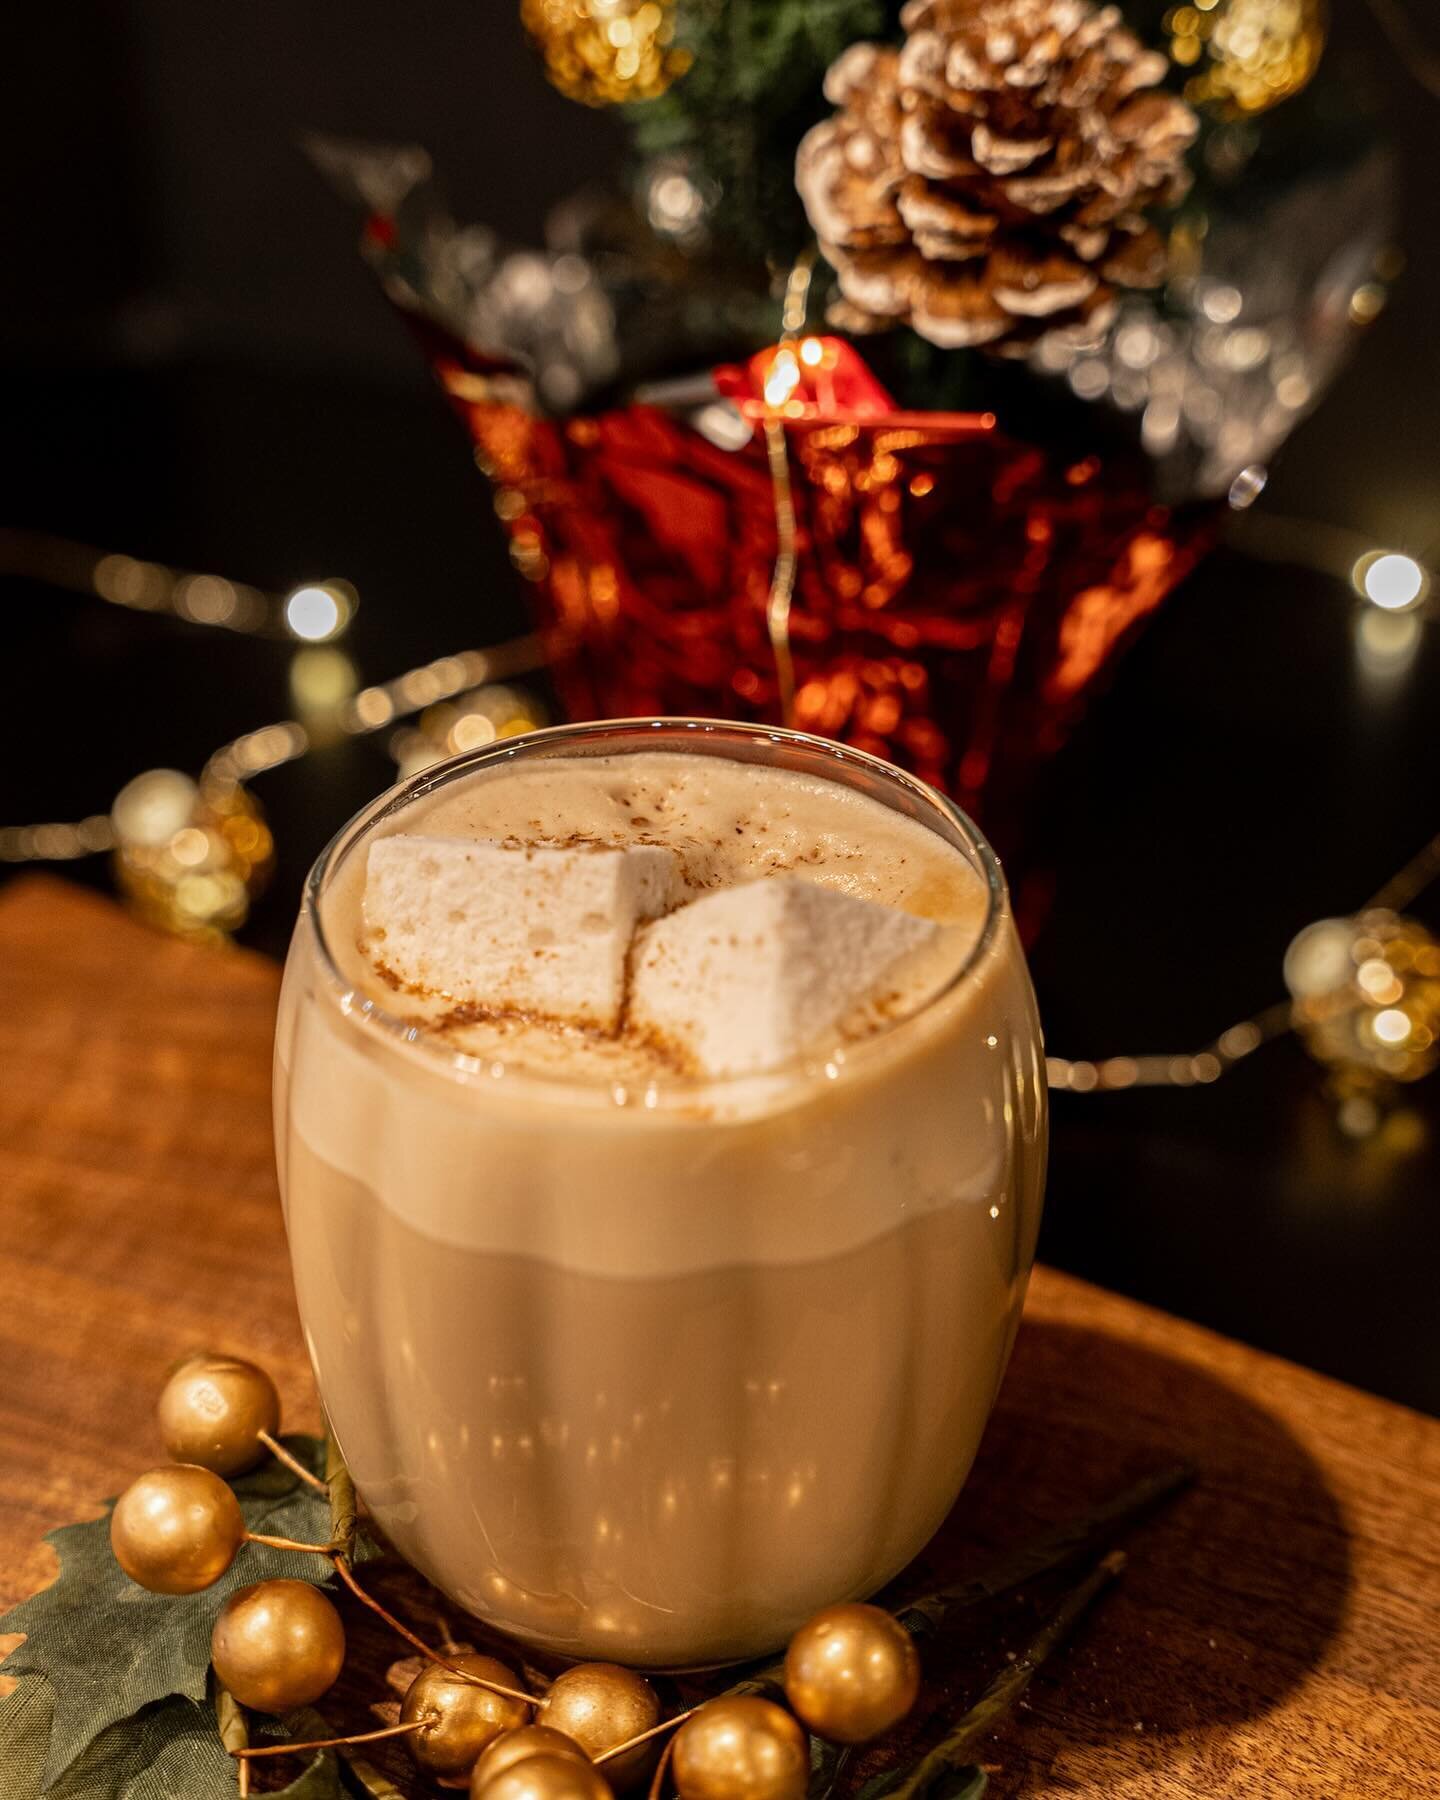 ButteryScotch Rum latte anyone?

Holiday cheer floats in this glass!  We add i. an even amount of infused ButterScotch and Rum paired with a vanilla marshmallow as an option from our friends over at @xo.marshmallow.  Finished with a dash of nutmeg to